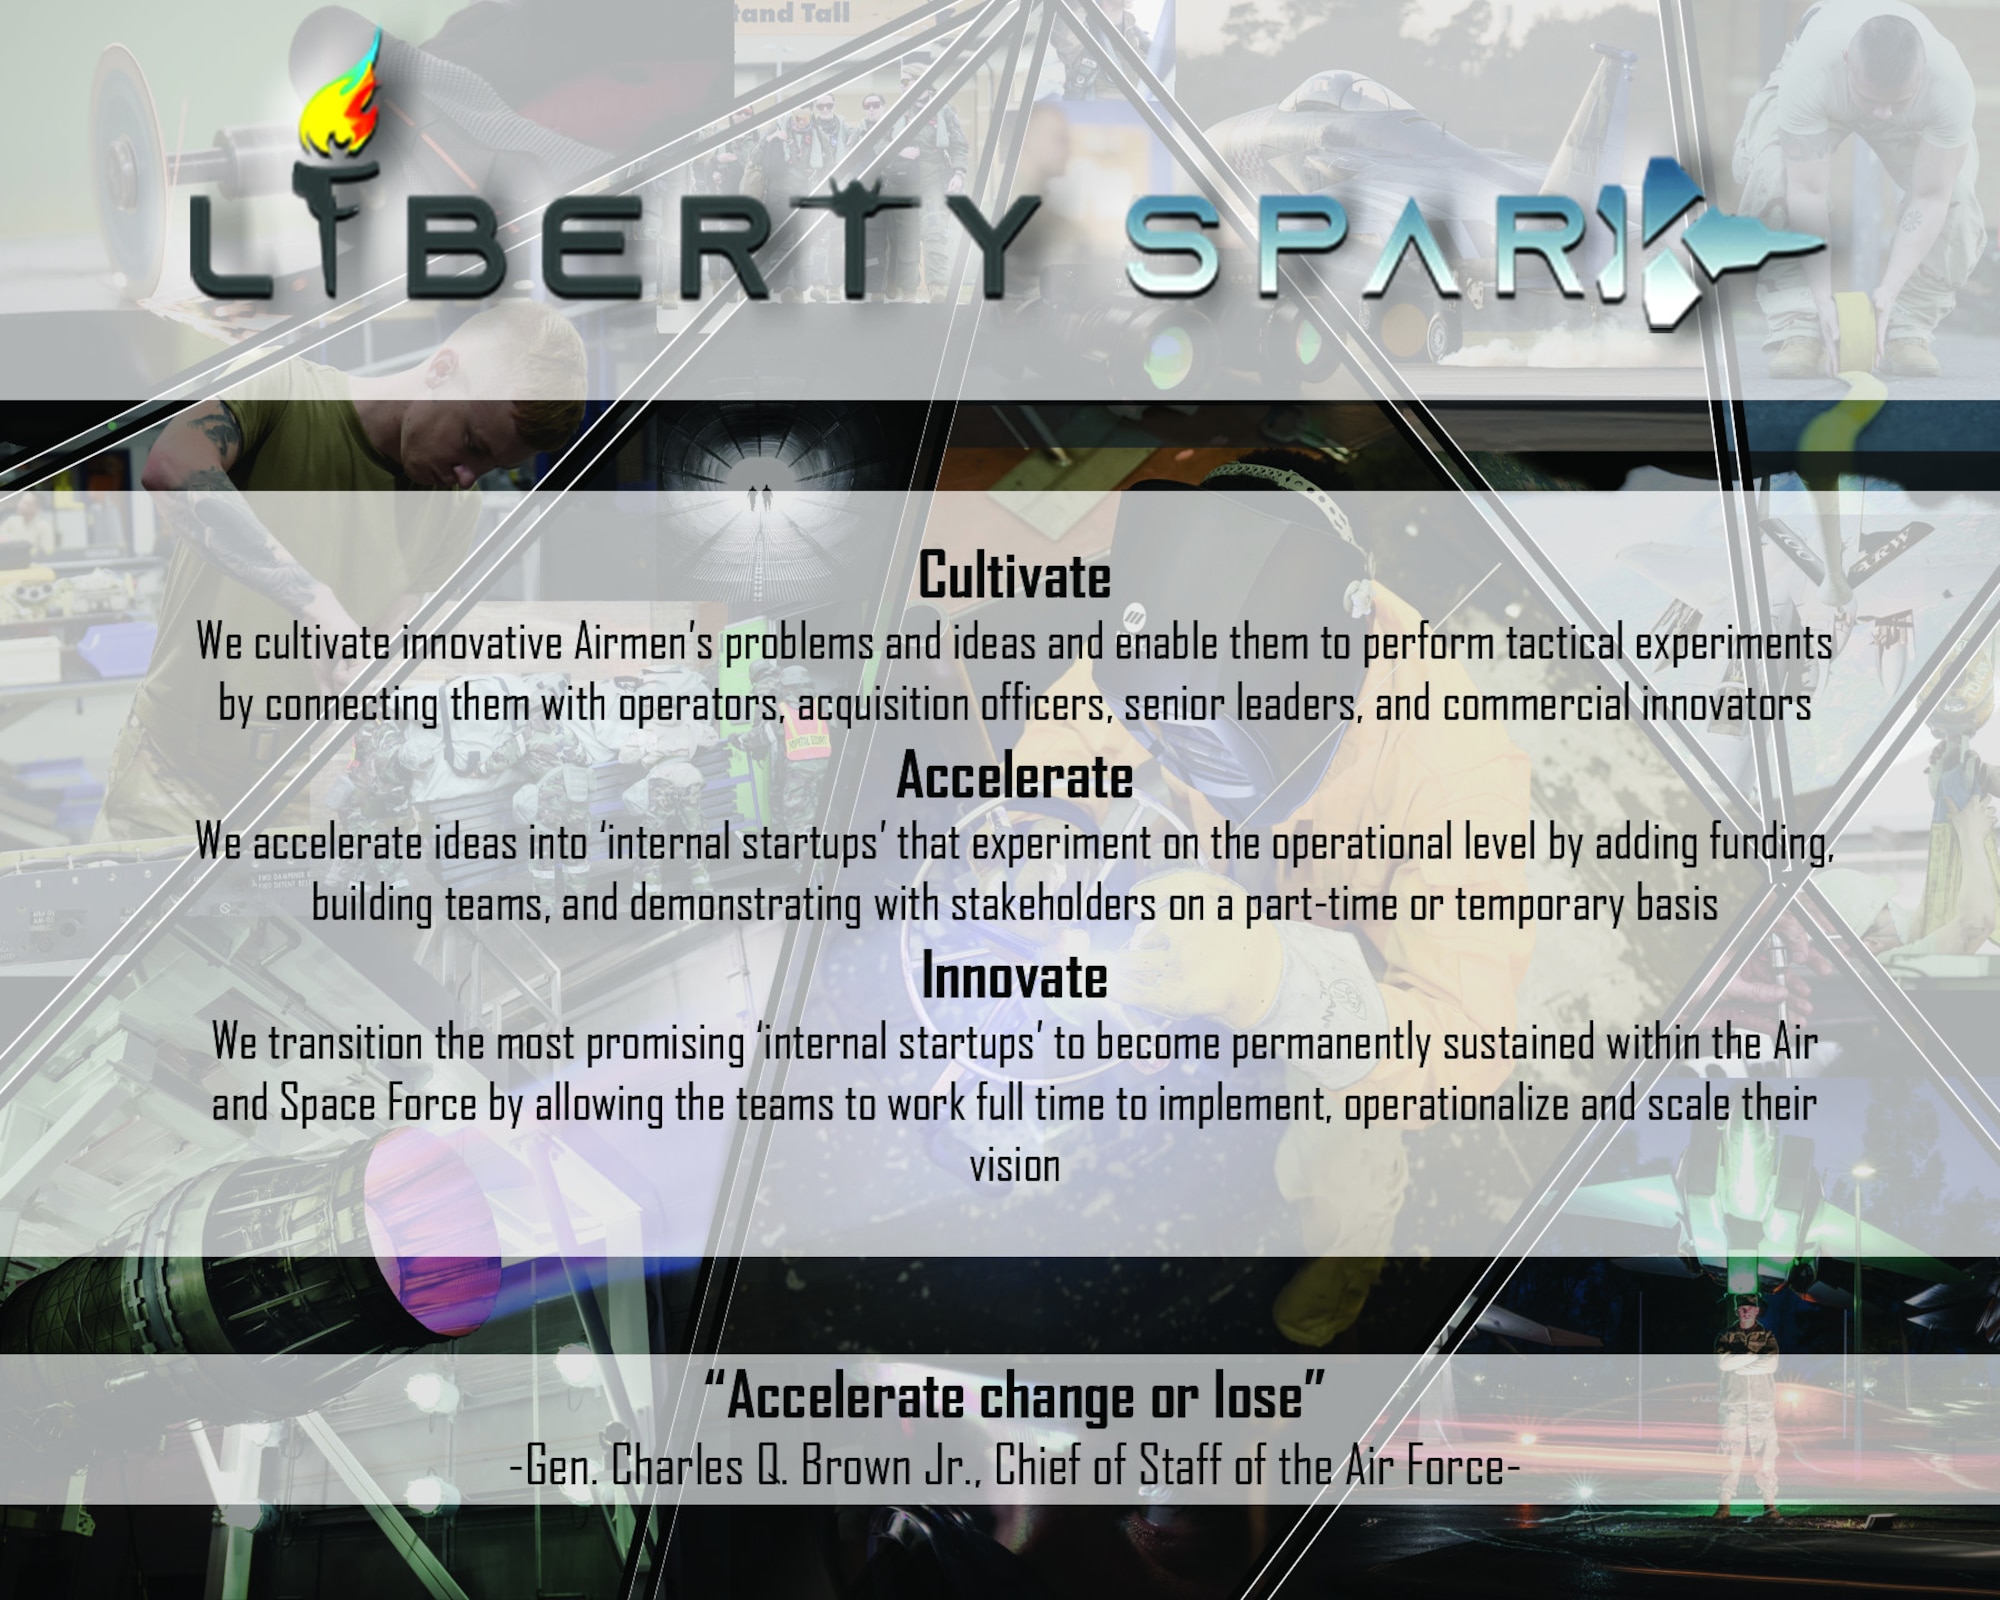 The Liberty Spark Cell is available to help Airmen with innovation ideas take them from a concept and refine it into a proposal, so they are able to gather the resources needed to create a prototype. The Air Force is continuing to move forward with the culture of innovation, and utilizing the Liberty Spark Cell will help with those efforts. (U.S. Air Force graphic by Senior Airman Madeline Herzog)